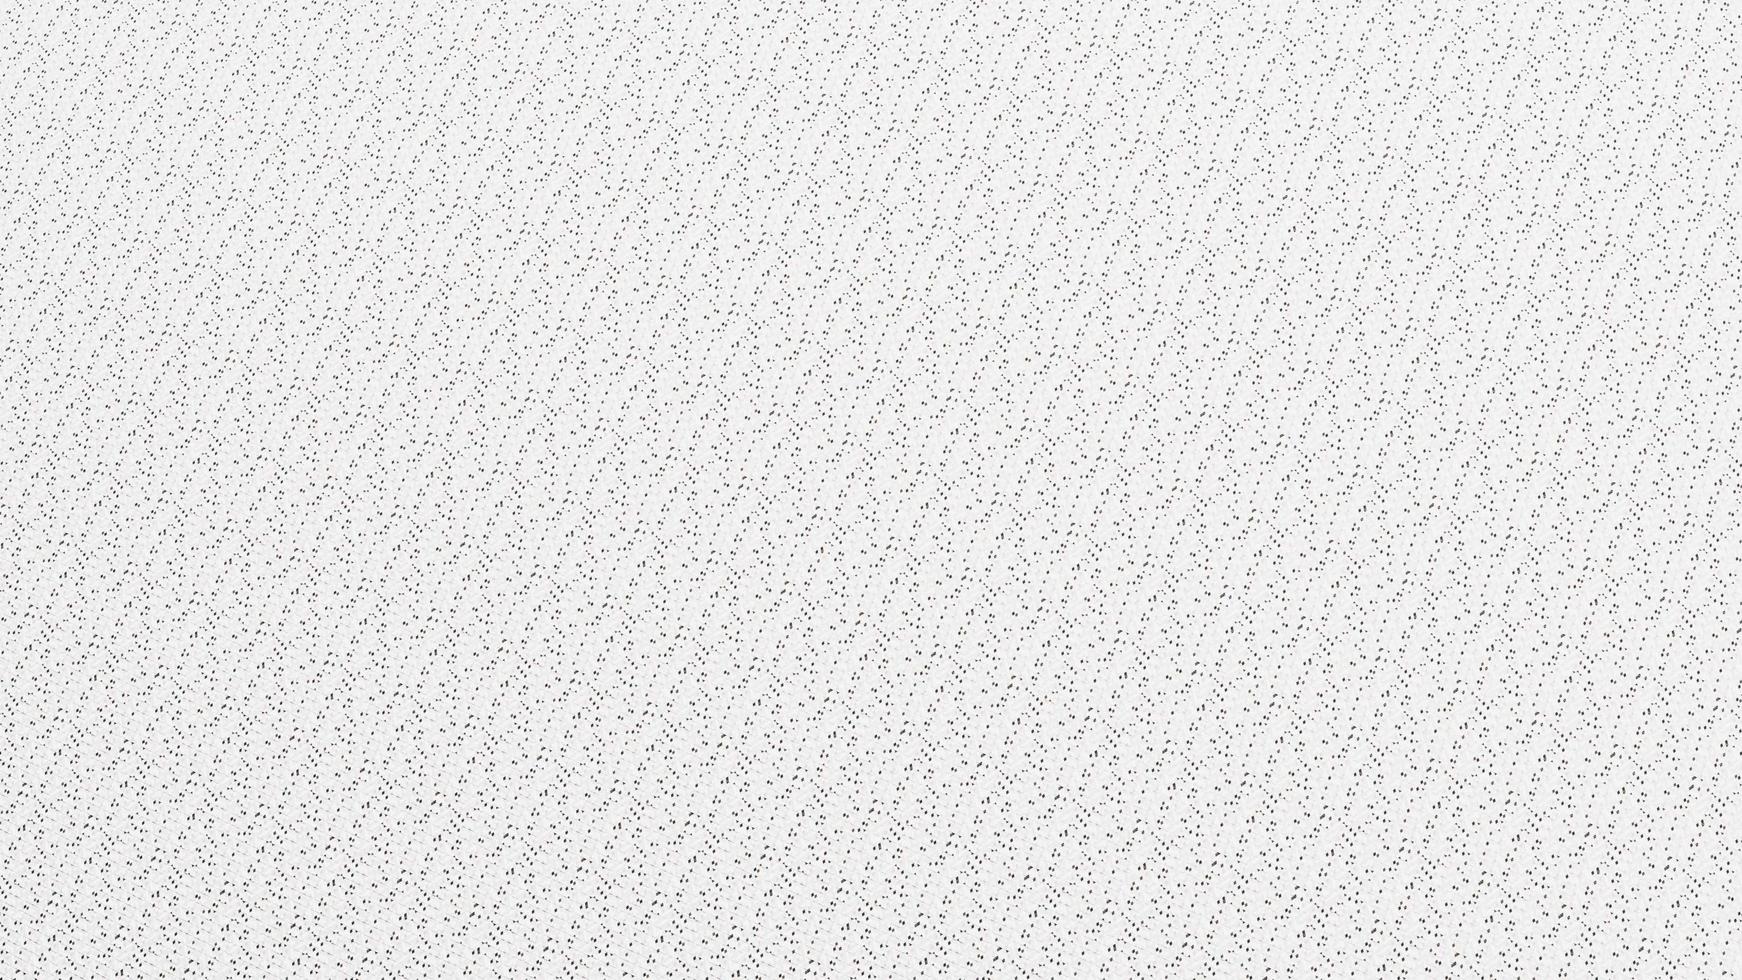 Concrete texture white and gray for background or cover photo